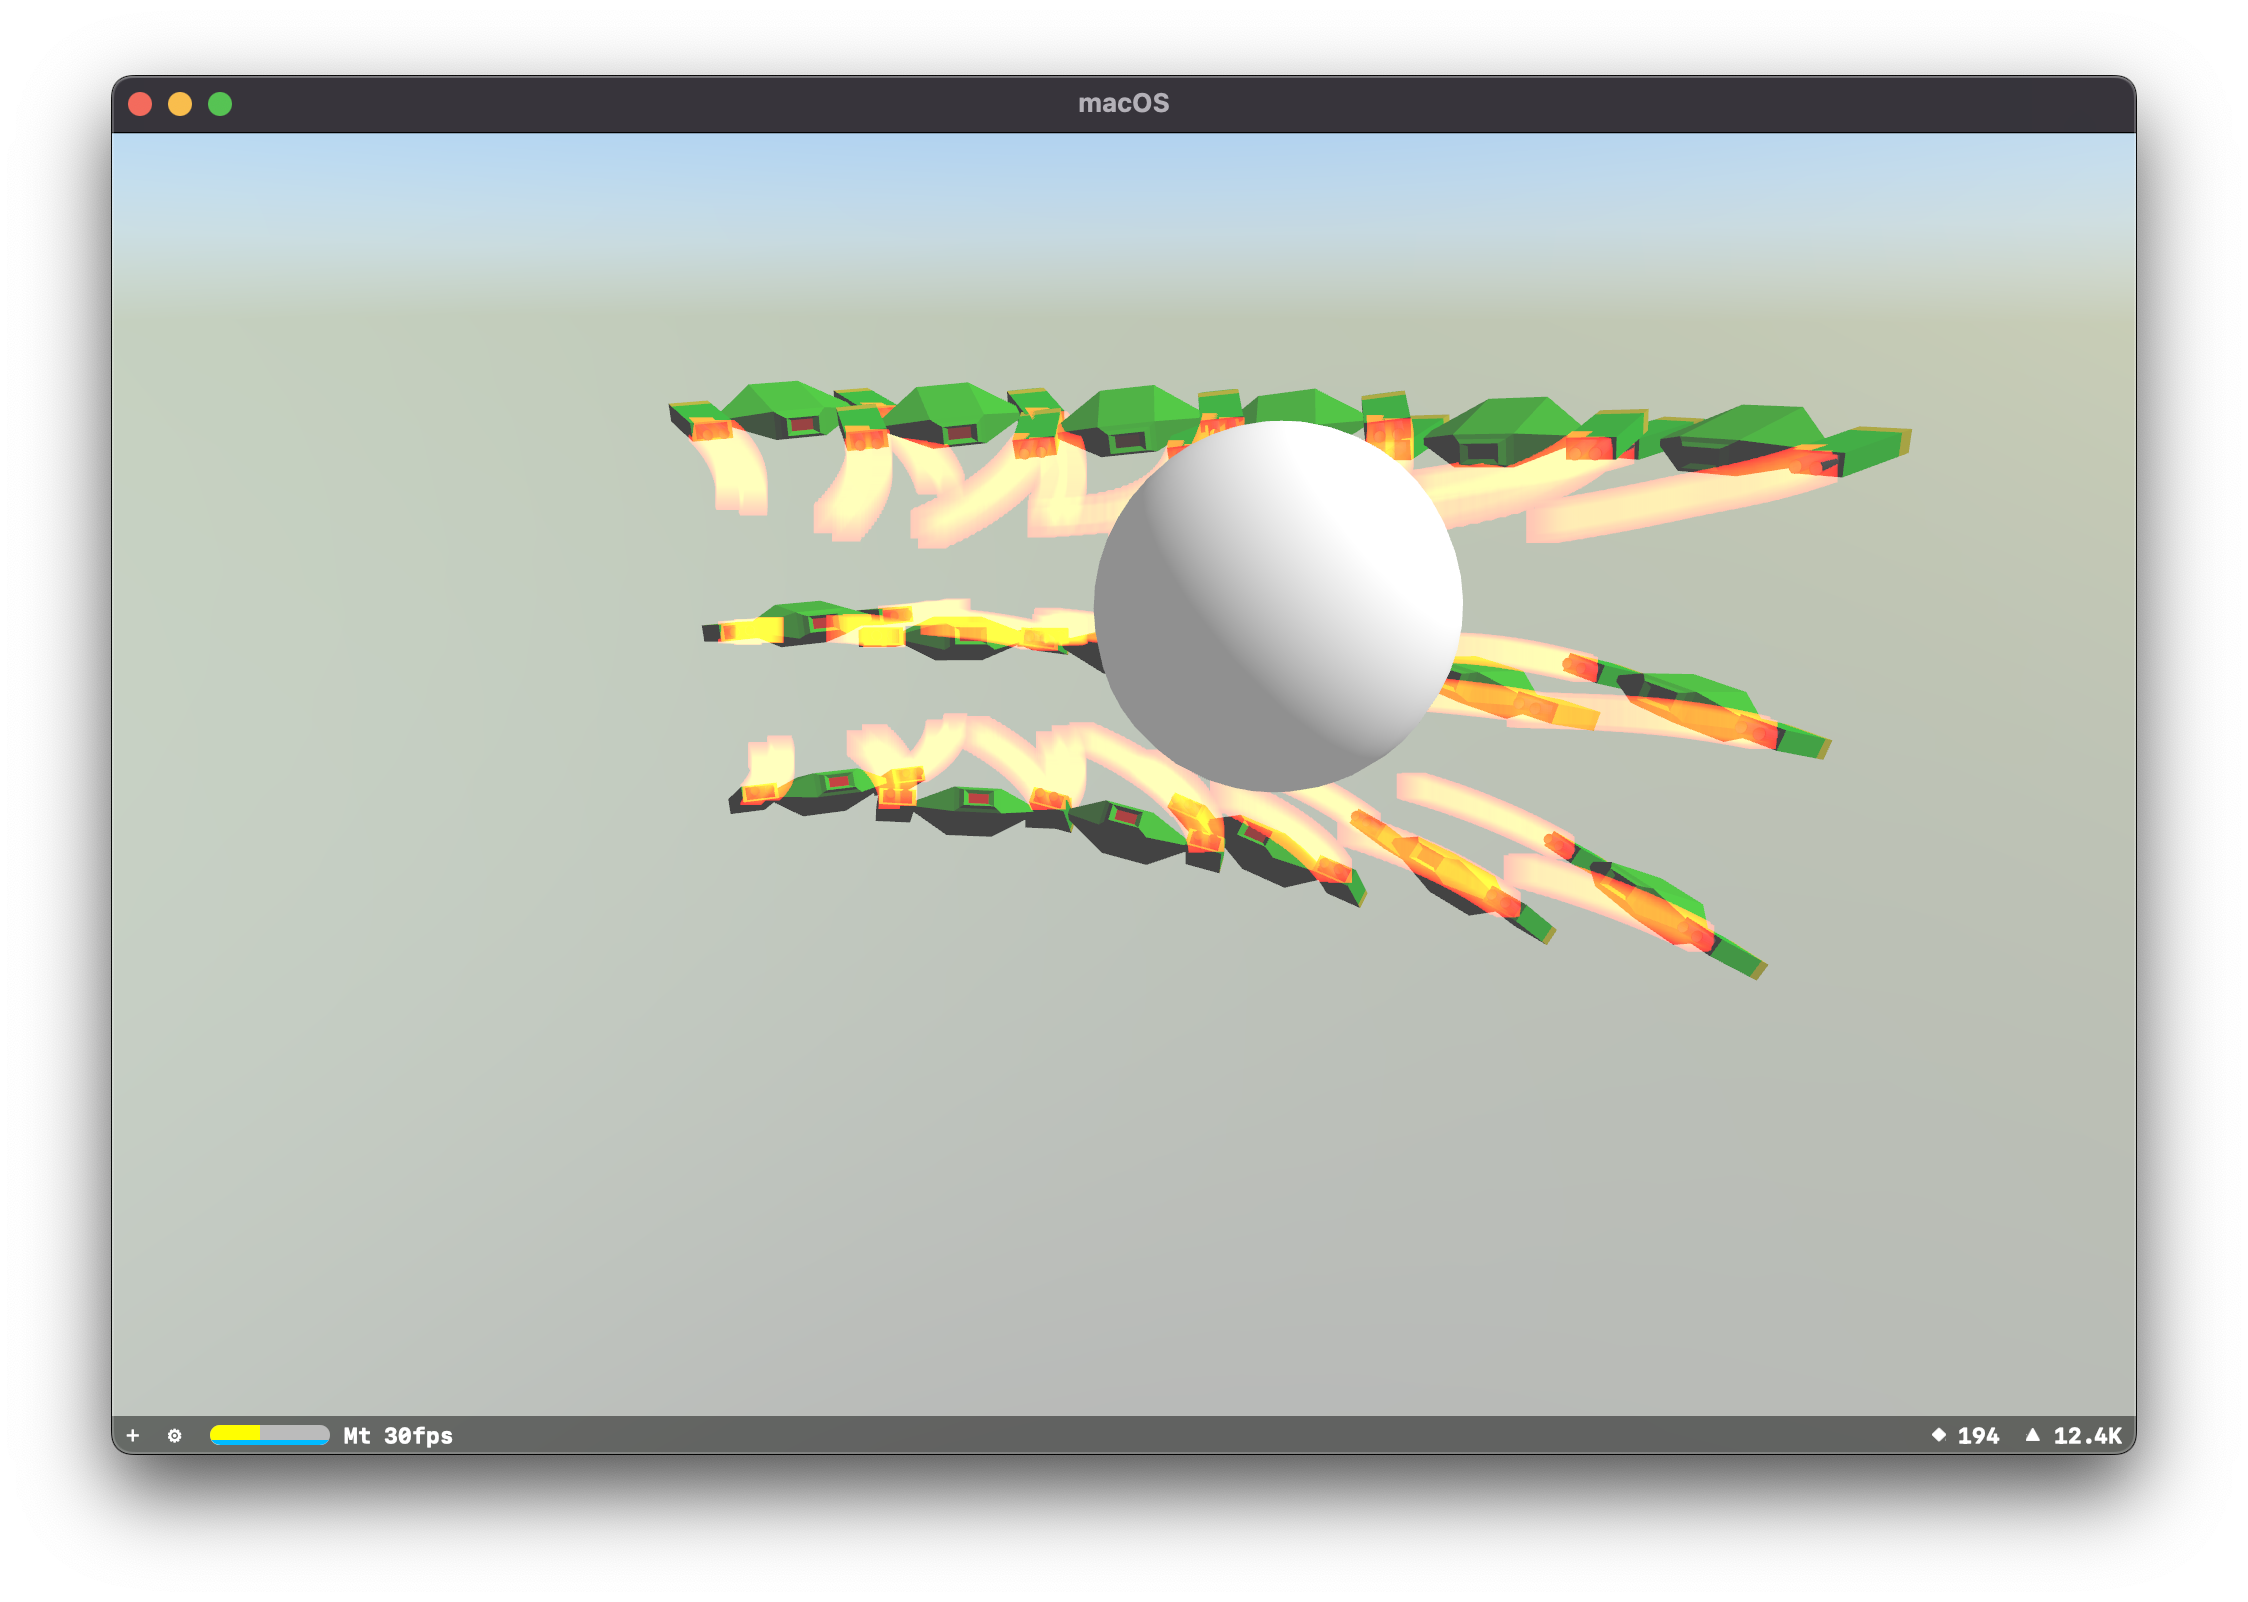 A simple particle systems test scene in SceneKit, feautring many green Marten models, rotated and firing towards a white sphere